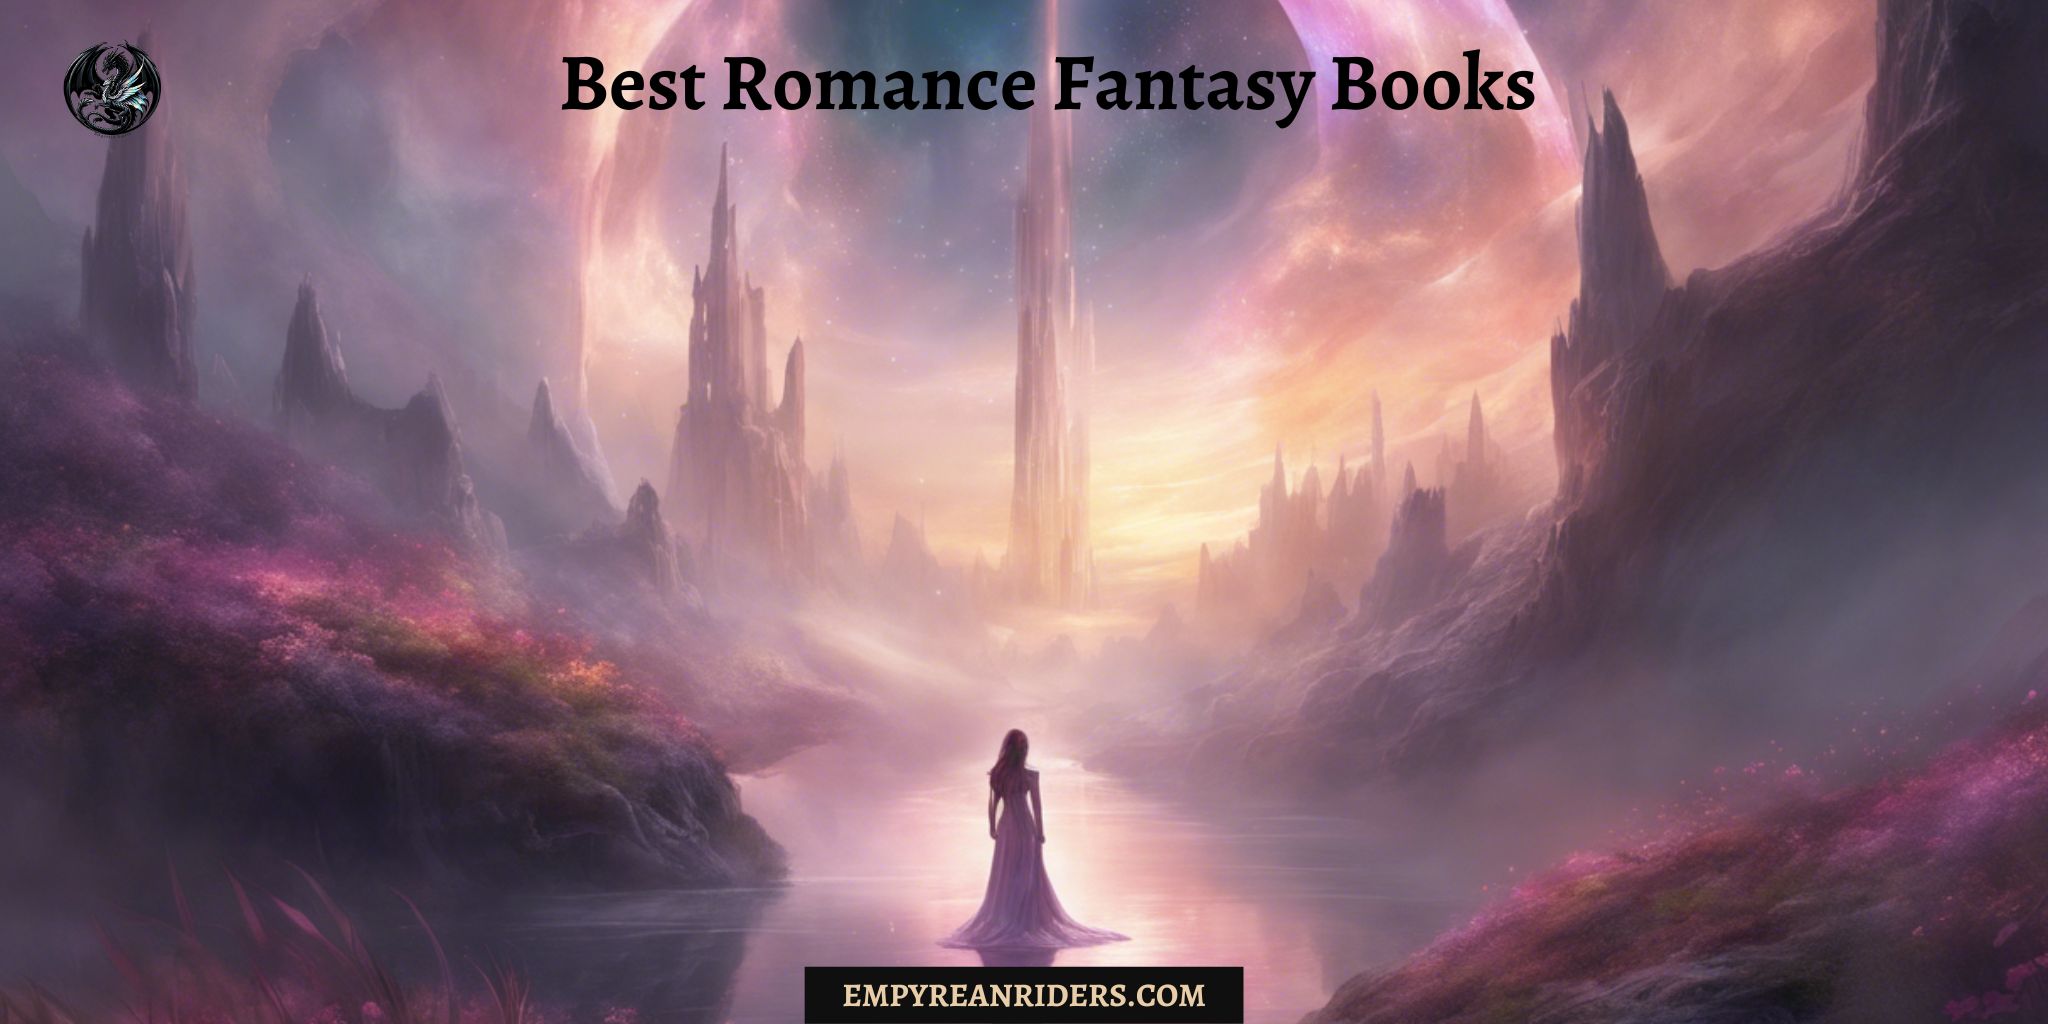 30+ Best Romance Fantasy Books (beyond the usual bestsellers)